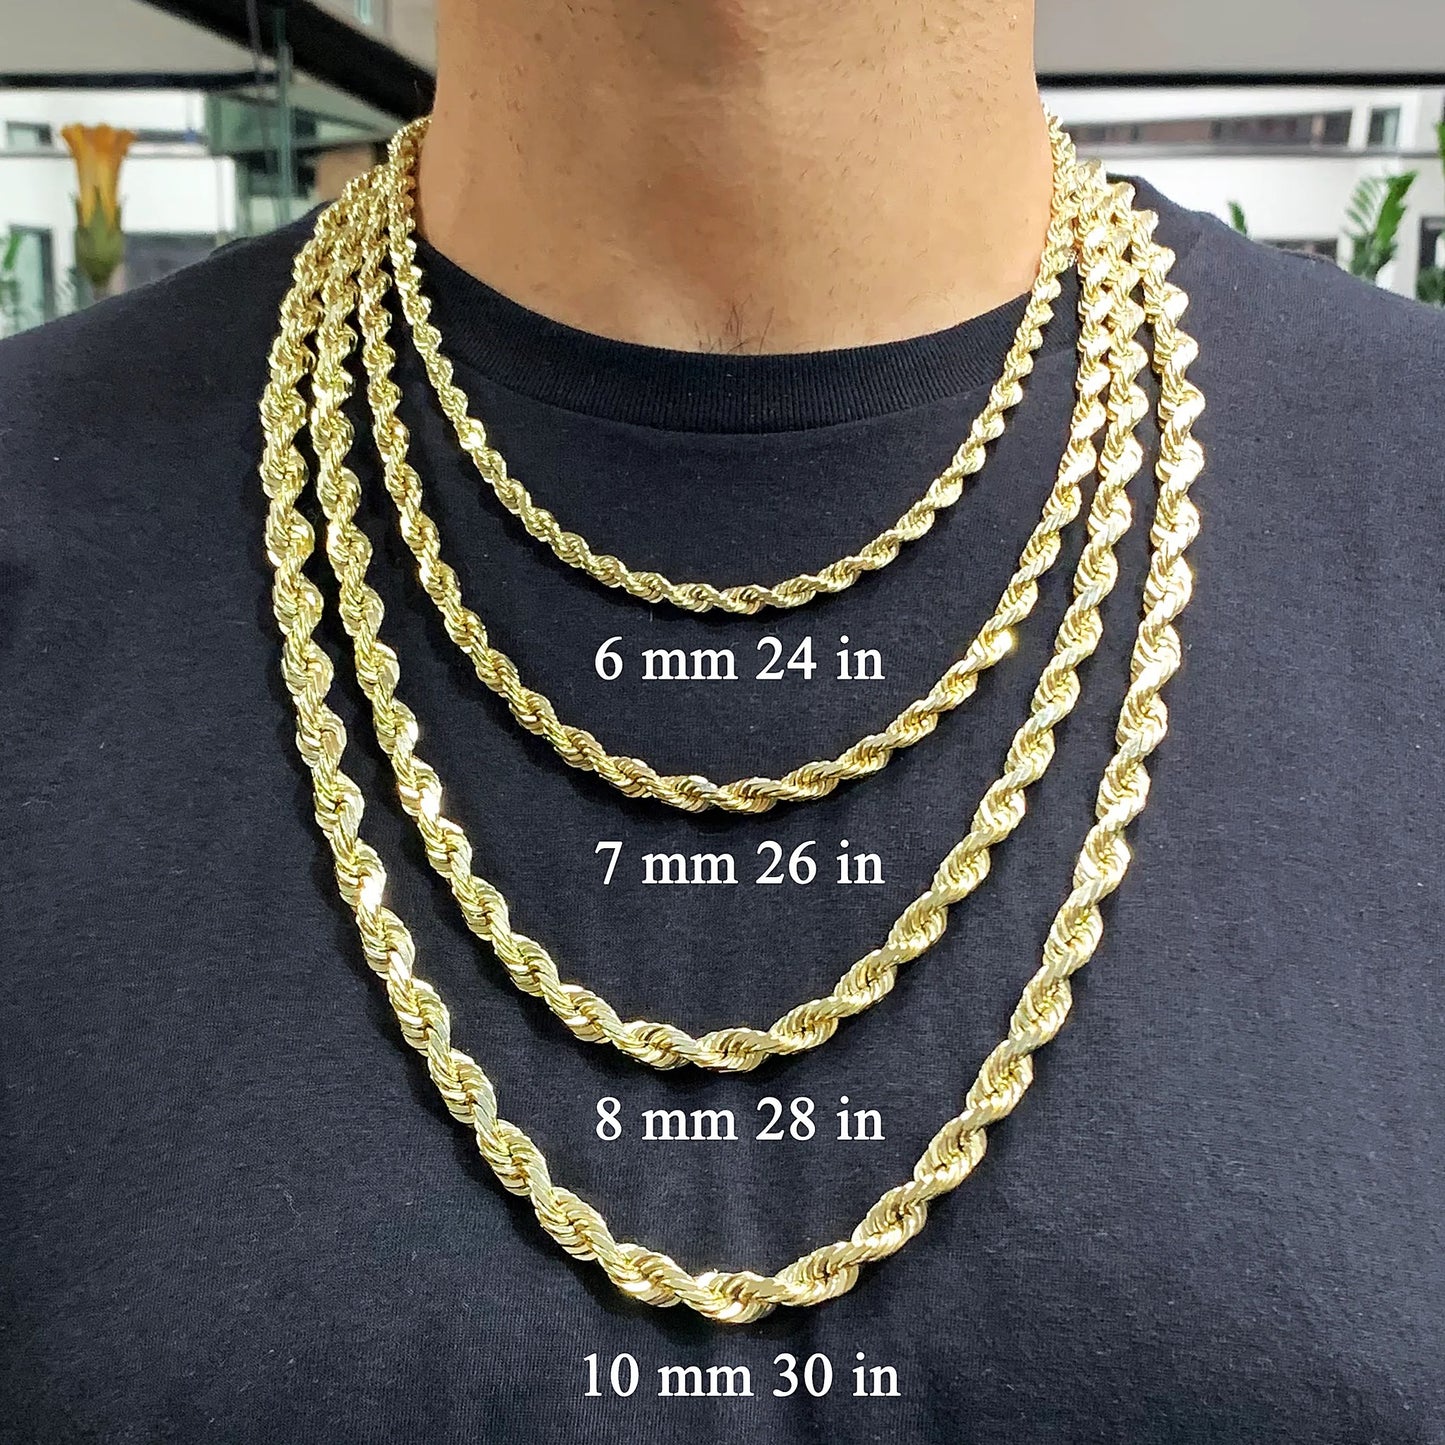 Rope Chain 6.8mm 18 inches 14k